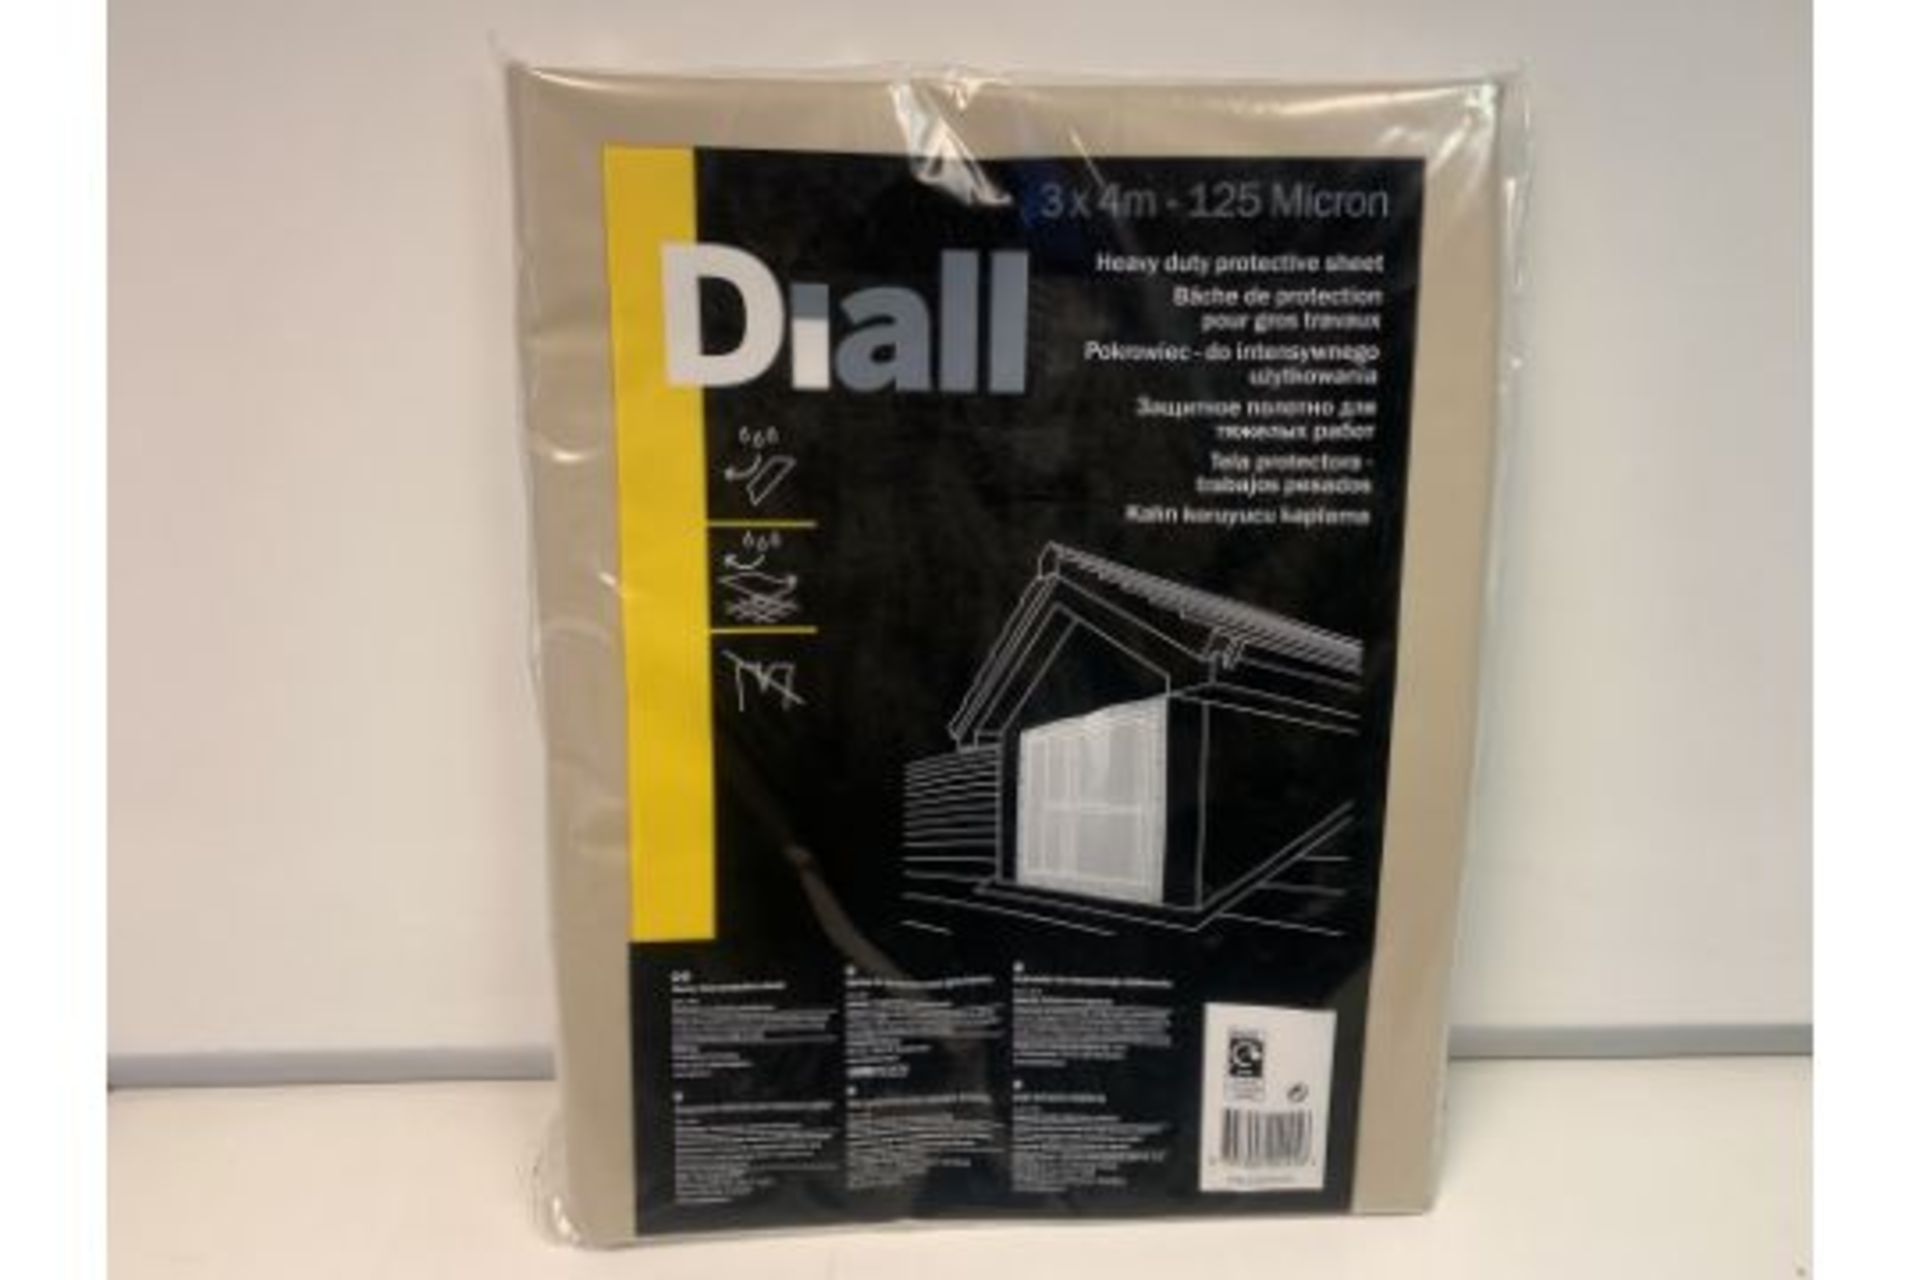 PALLET TO CONTAIN 72 X NEW PACKAGED DIALL 3x4M 125 MICRON HEAVY DUTY PROTECTIVE SHEETS (ROW10/11)